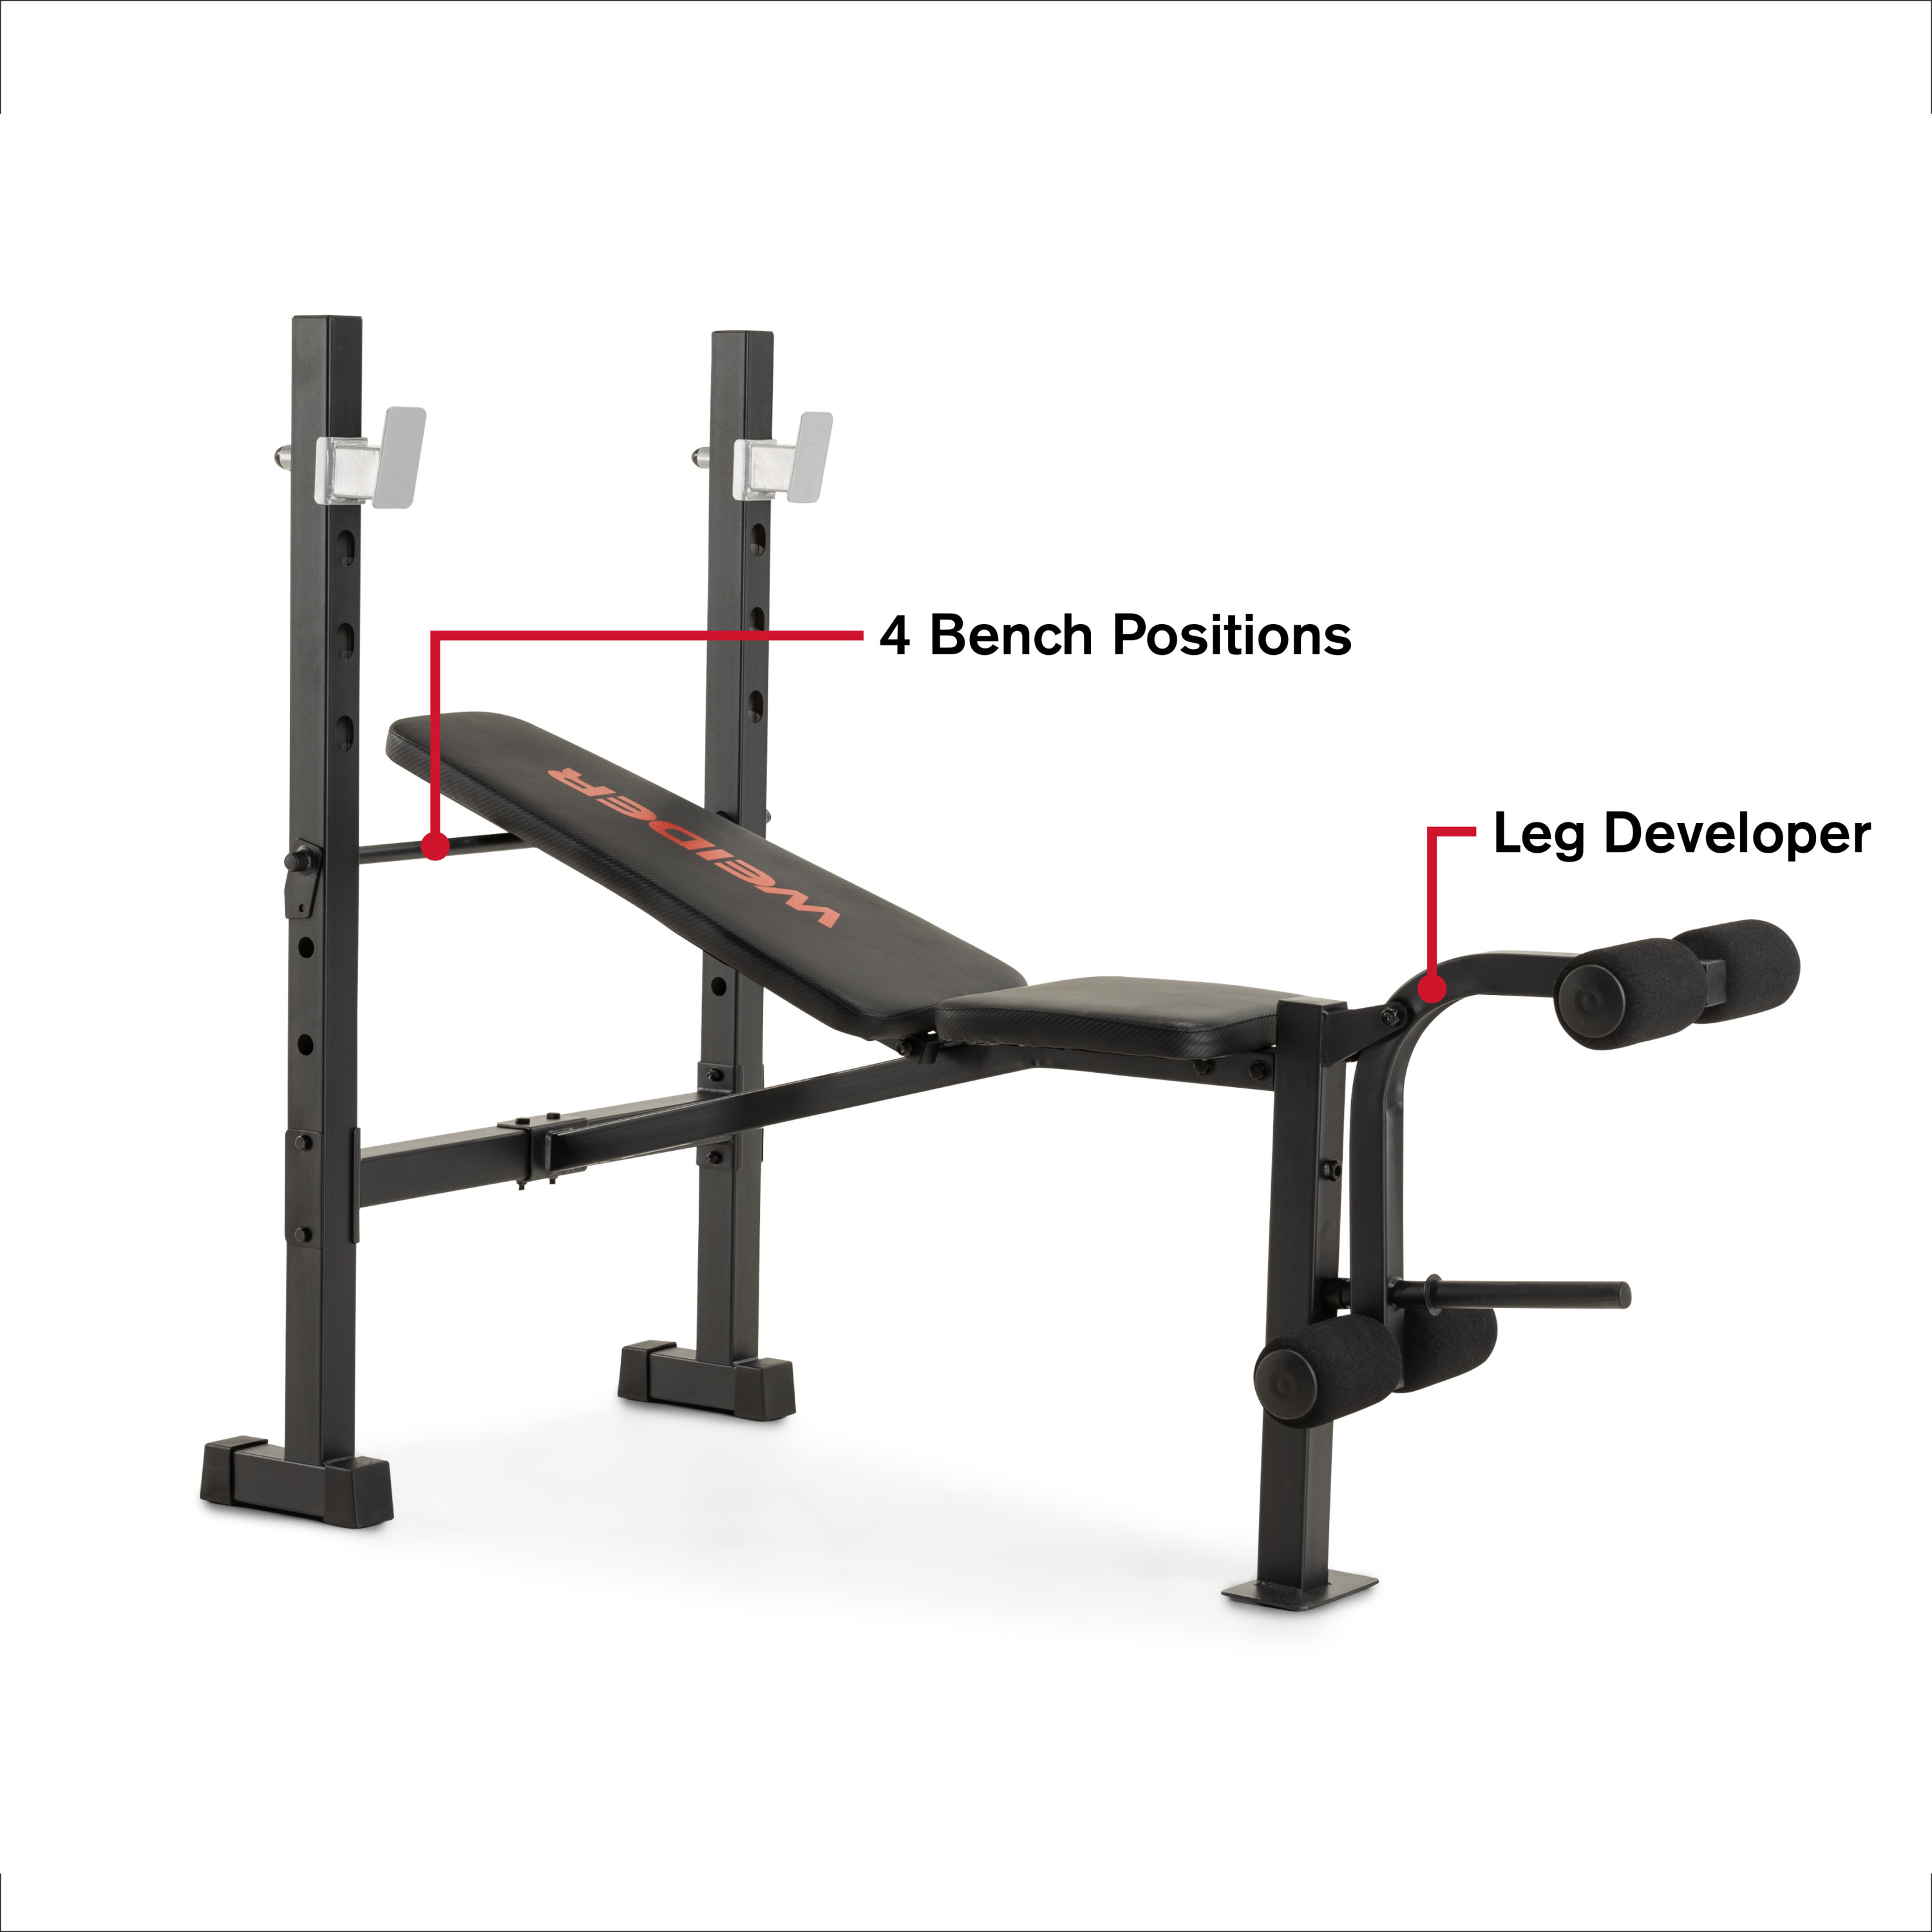 Weider Legacy Standard Bench and Rack, 410 Lb. Total Weight Capacity - image 3 of 23